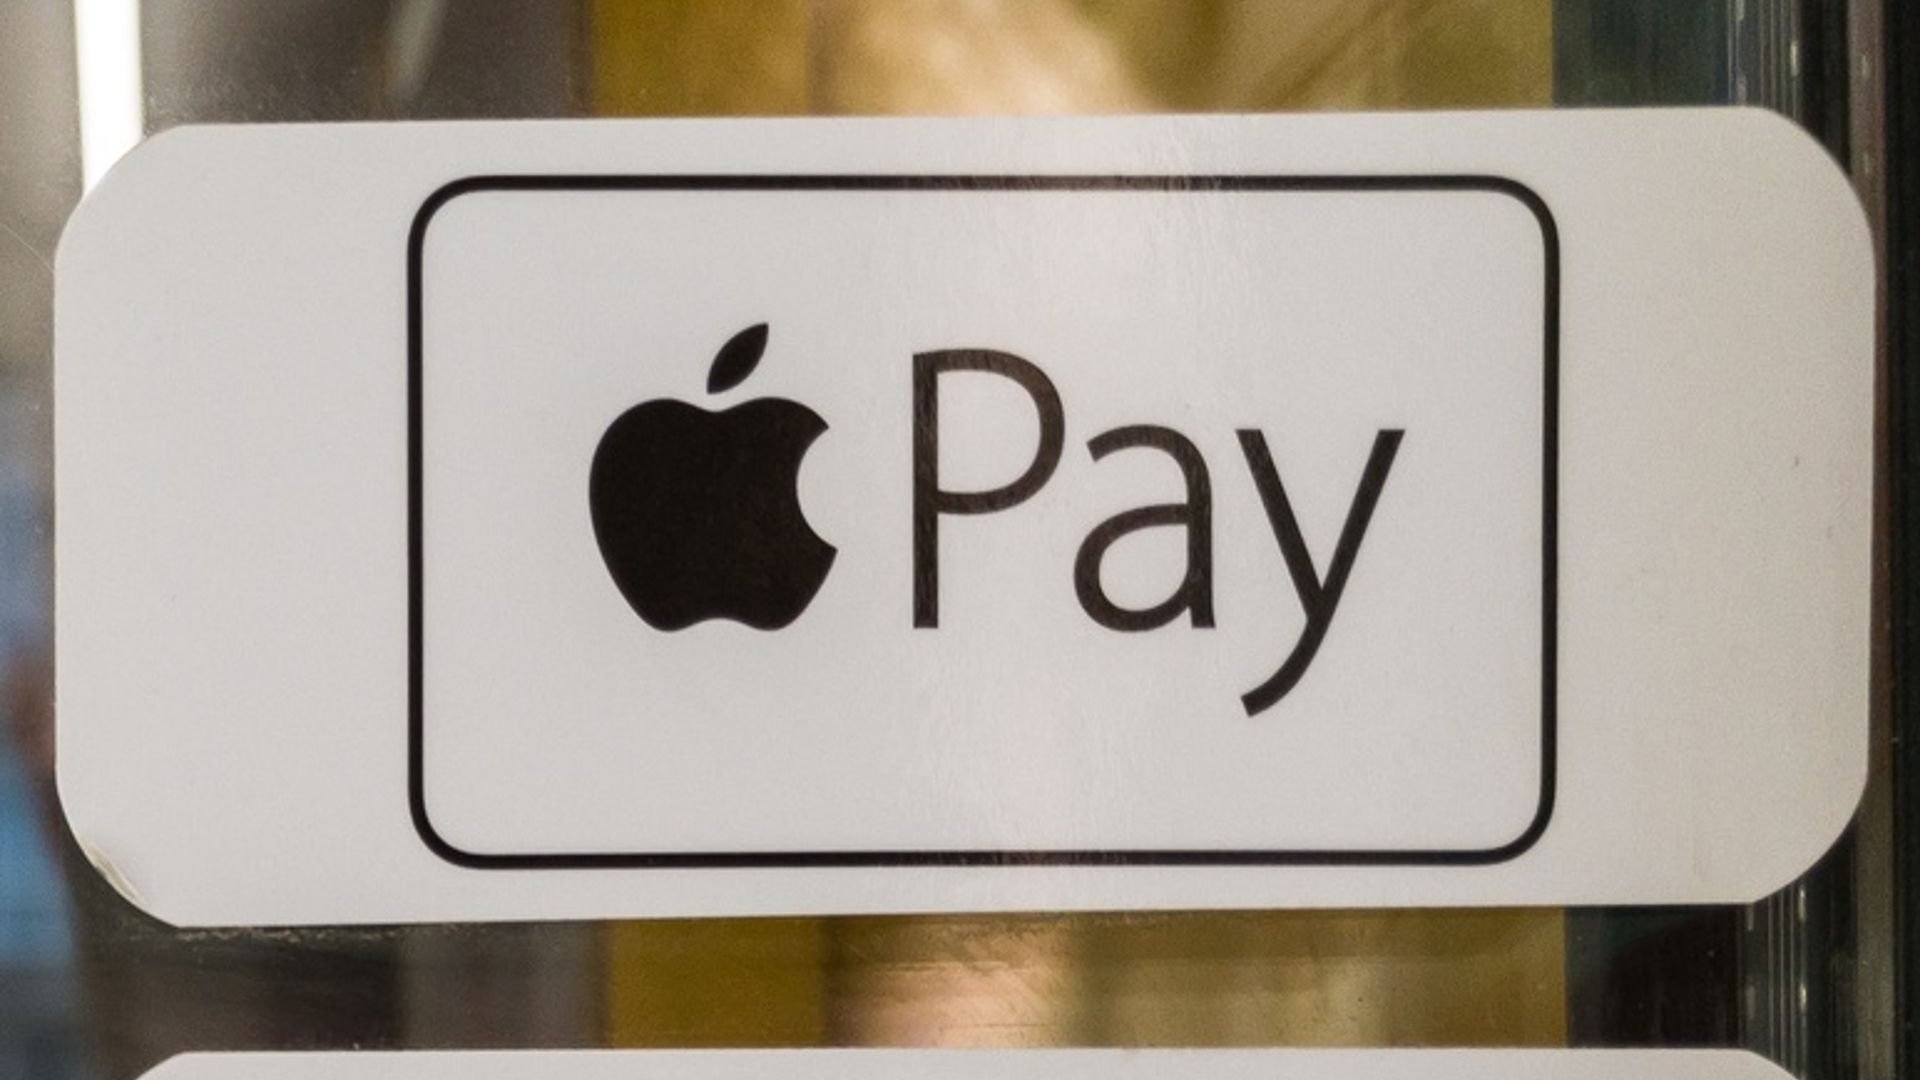 Russia can’t use Apple Pay any more